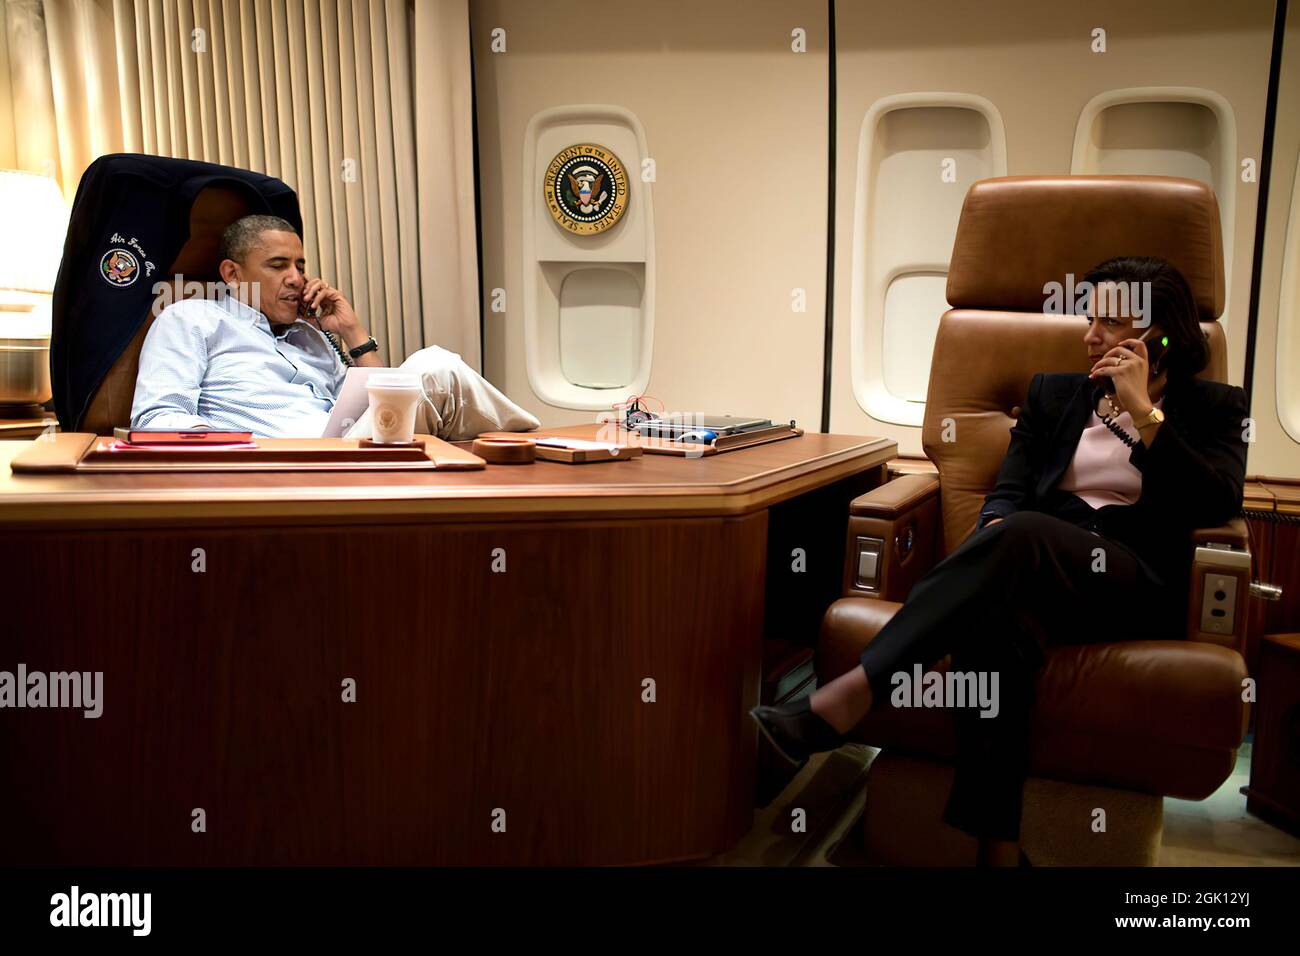 President Barack Obama, aboard Air Force One, talks on the phone with President Hamid Karzai of Afghanistan, who was unable to travel from Kabul to meet with President Obama at Bagram Airfield, Afghanistan, Sunday, May 25, 2014. National Security Advisor Susan E. Rice sits at right. (Official White House Photo by Pete Souza) Stock Photo